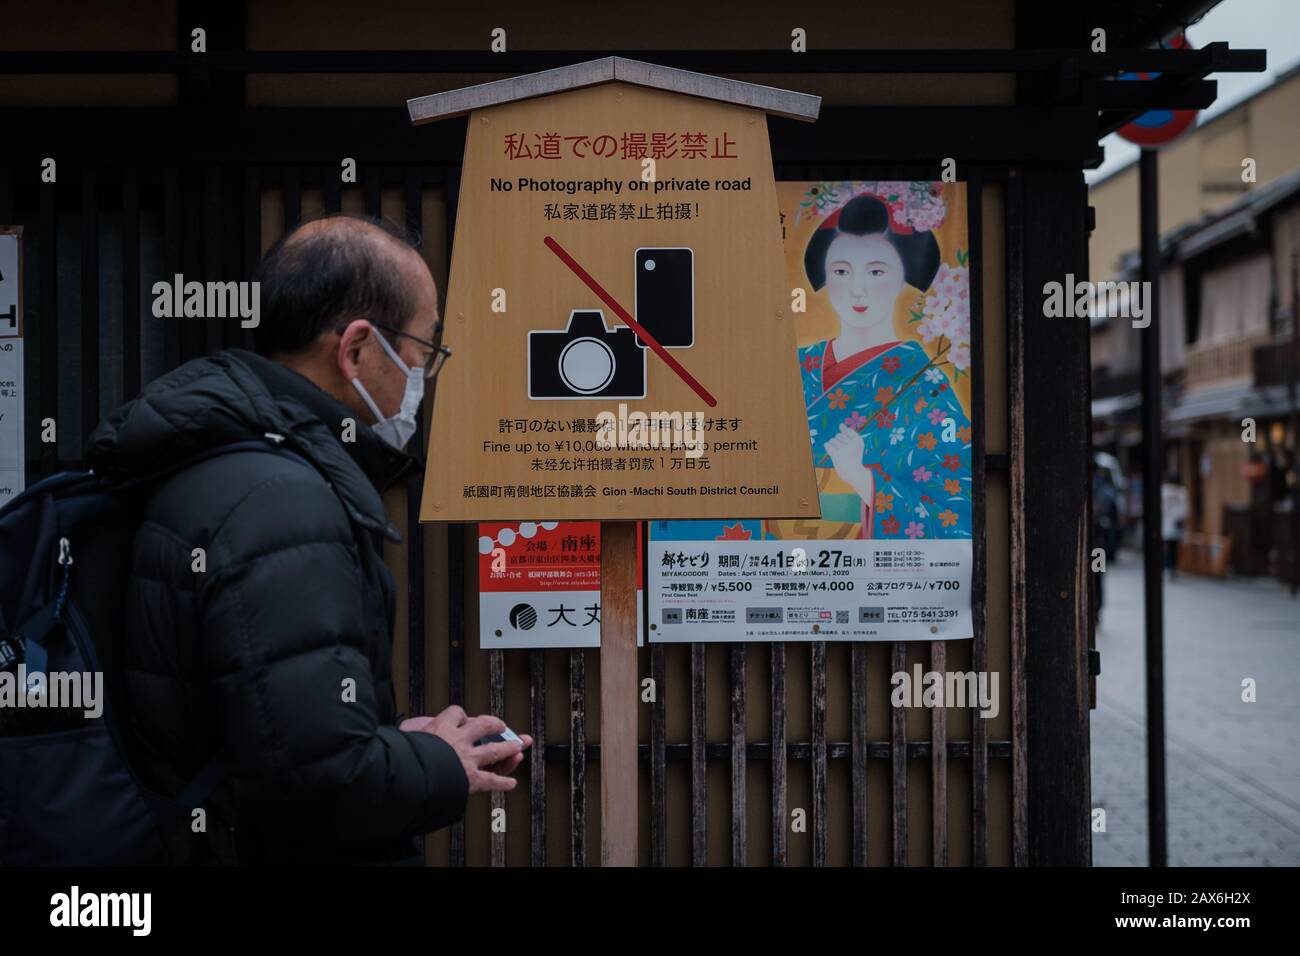 A man wearing a mask passes by a board sign banning photography and poster of geisha on Hanamikoji Street on February 10, 2020. The boorish behavior of tourists who have harassed geisha, destroyed property and committed other obnoxious acts has led to a ban on photography on private roads in Kyoto's famed Gion district.Following the outbreak of Coronavirus situation many chinese tourists cancelled trip in Japan during winter. The city is empty of bus and tourist's groups. February 10, 2020 Credit: Nicolas Datiche/AFLO/Alamy Live News Stock Photo